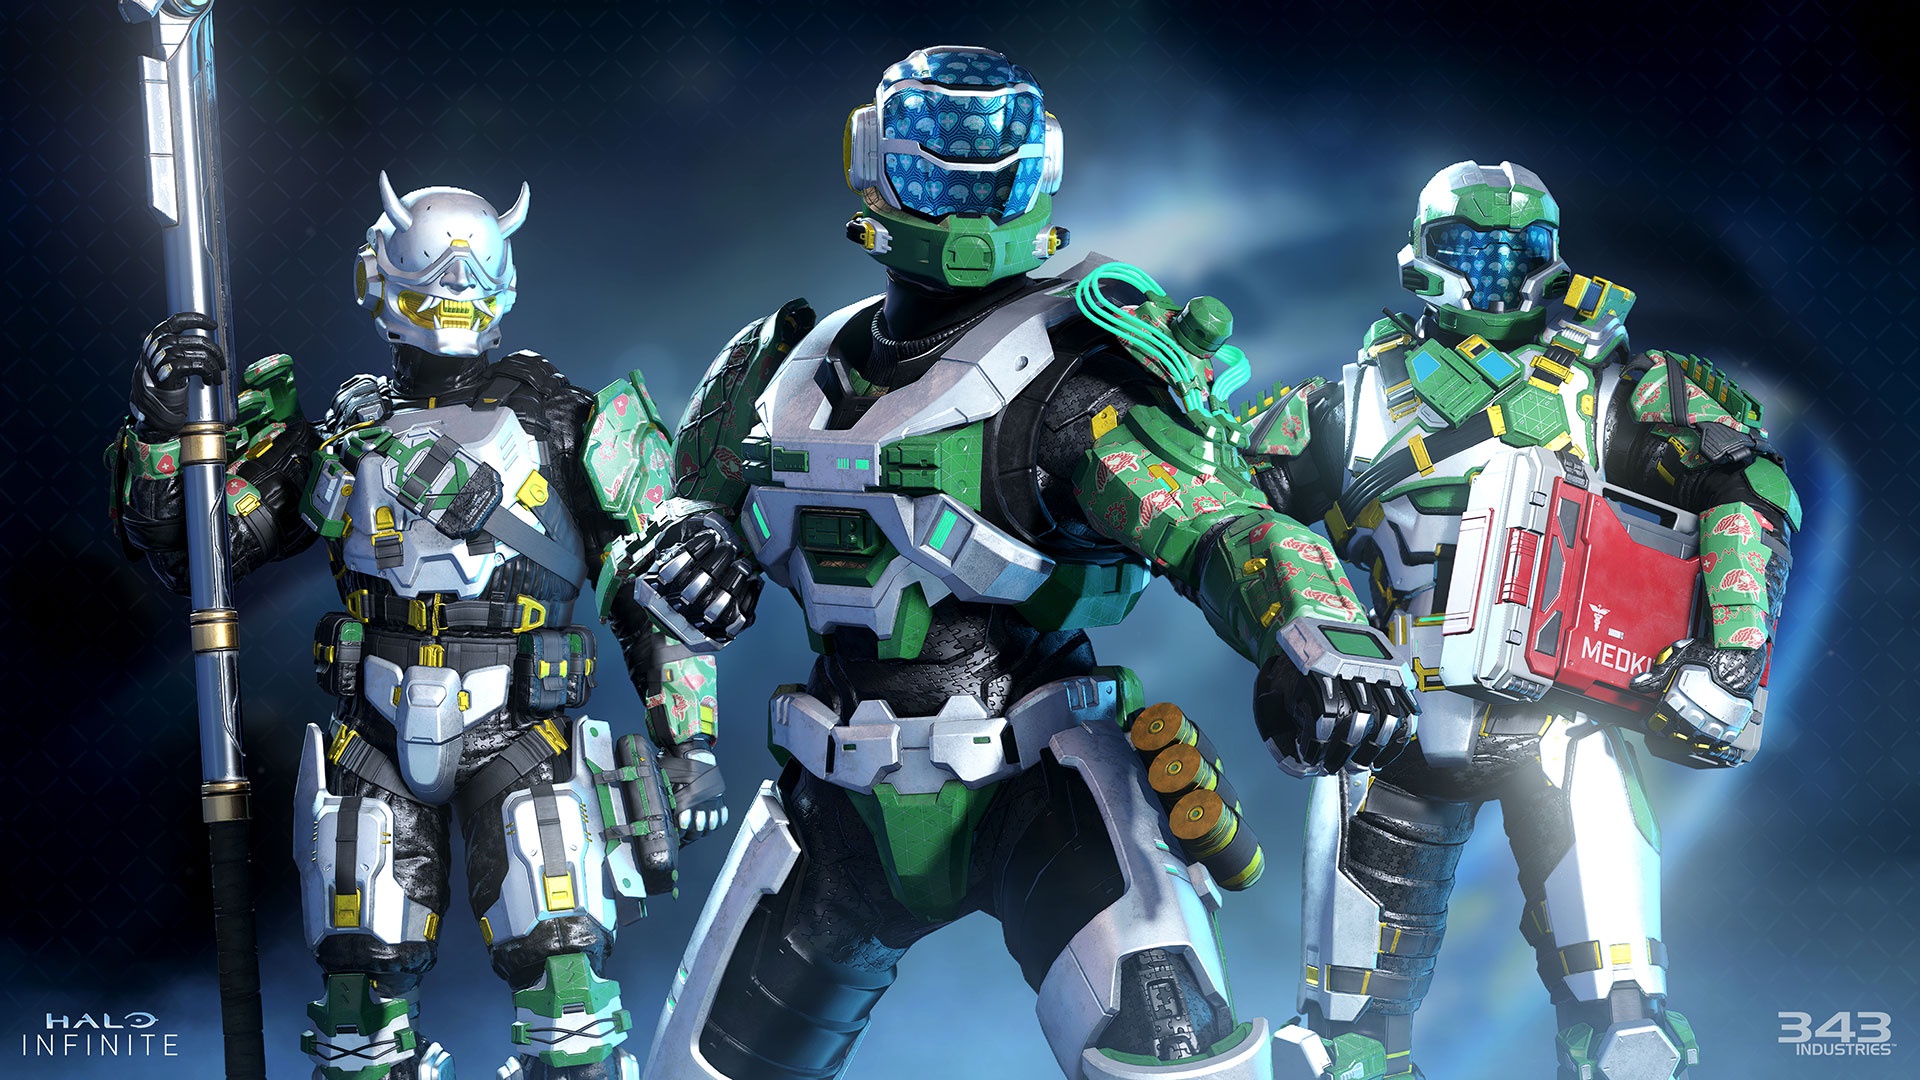 Halo infinite image of three Spartans clad in the Mental Health Awareness Month coating